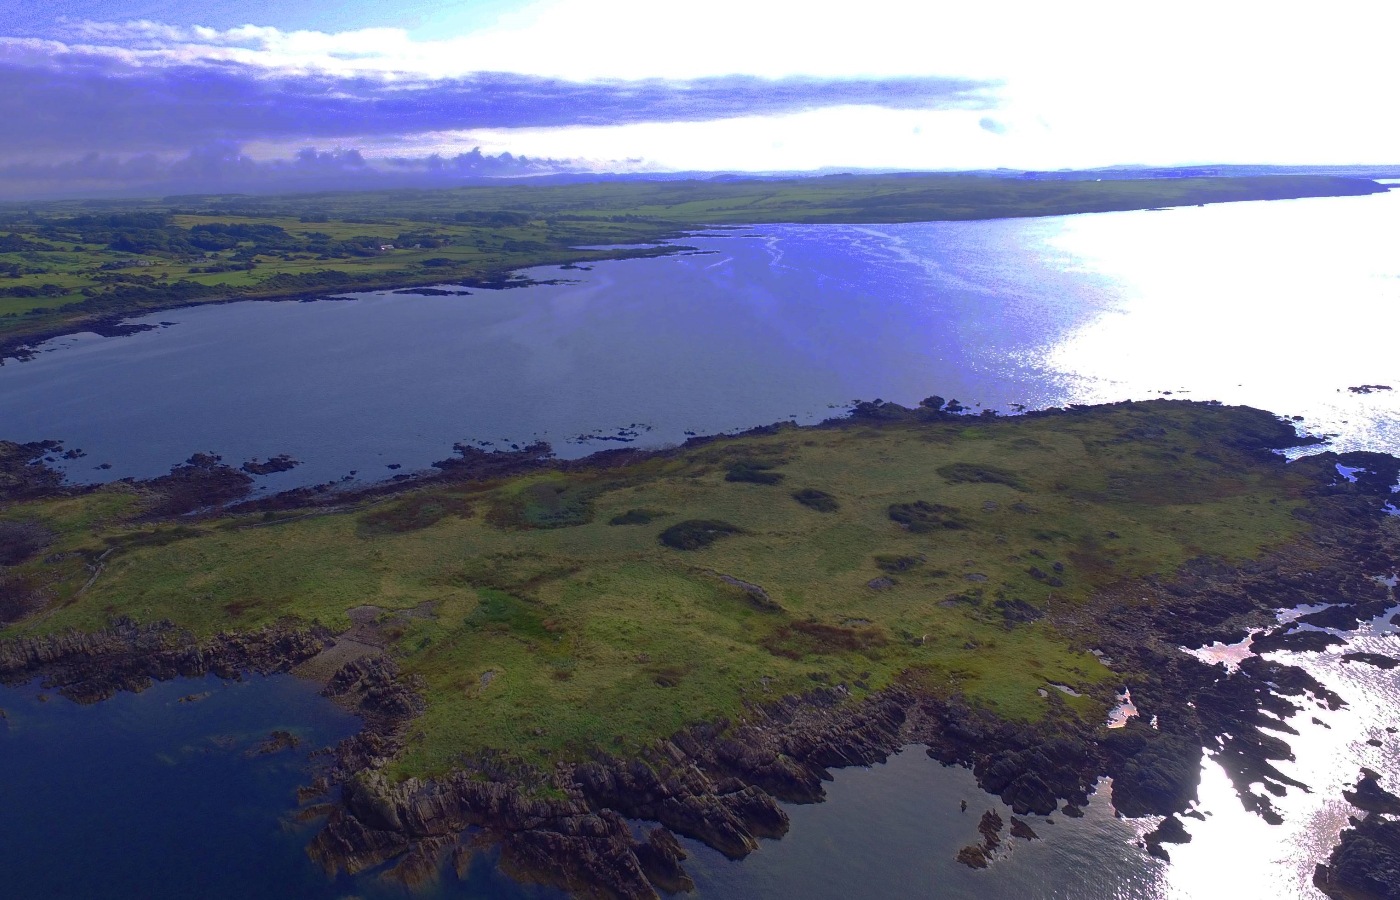 Barlocco Island, which sits in Fleet Bay near Dumfries and Galloway, has been on the market for offers over £150,000.